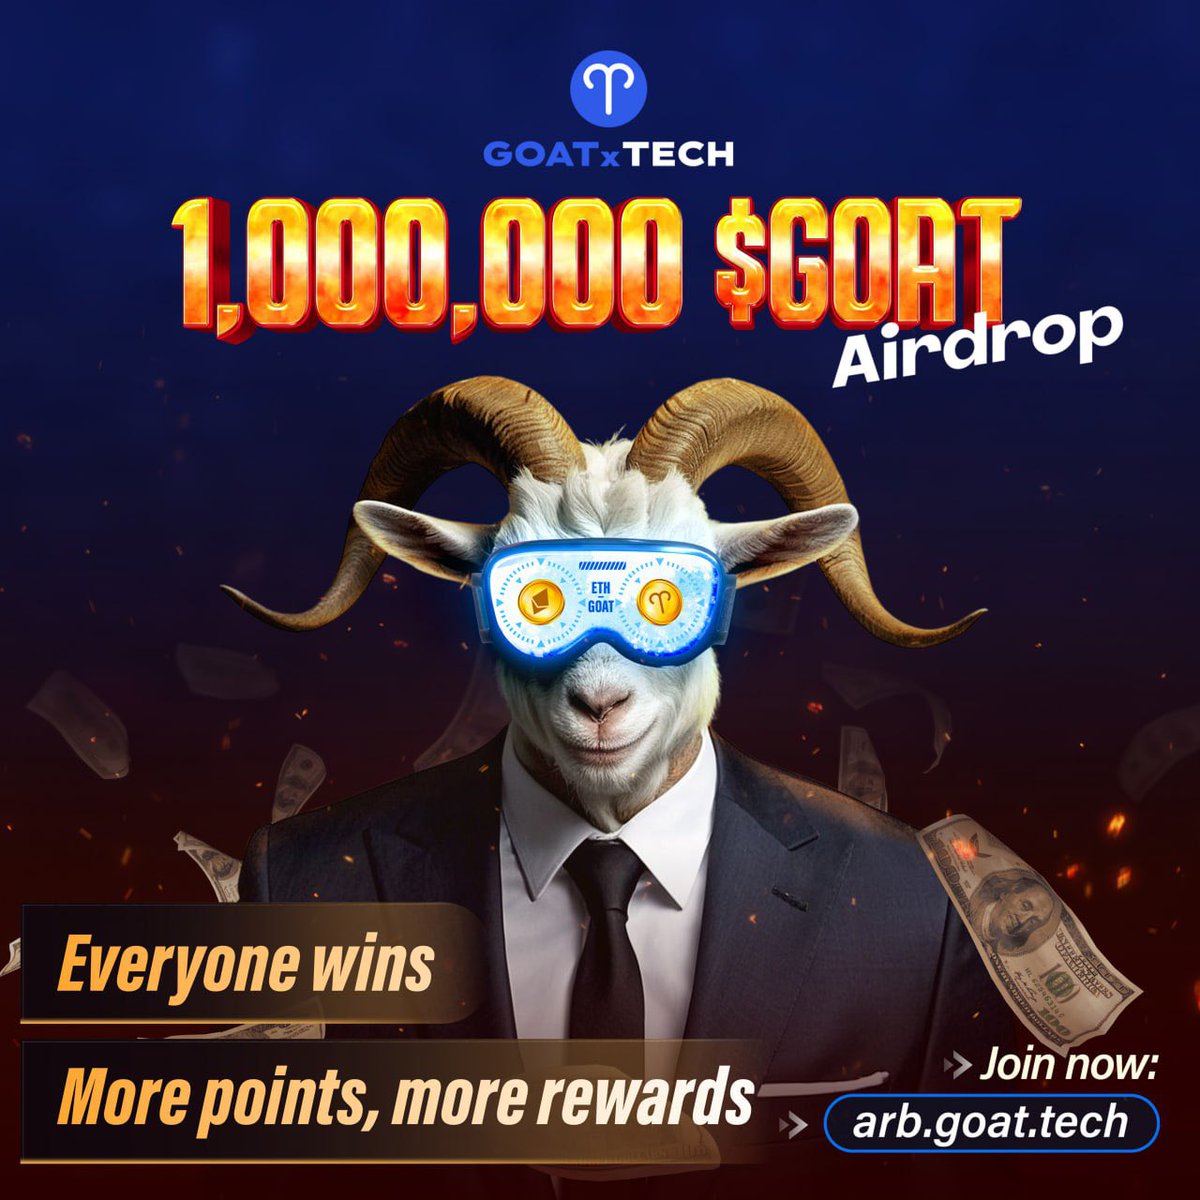 ￼'1,000,000 $GOAT' Airdrop - ￼arb.goat.tech ￼Prize: 1,000,000 $GOAT to share. All eligible participants win with more points, more rewards. ￼Introducing Goat.Tech - First Gamified On-chain Reputation with Native Yield to earn $ETH ￼ and $GOAT ￼